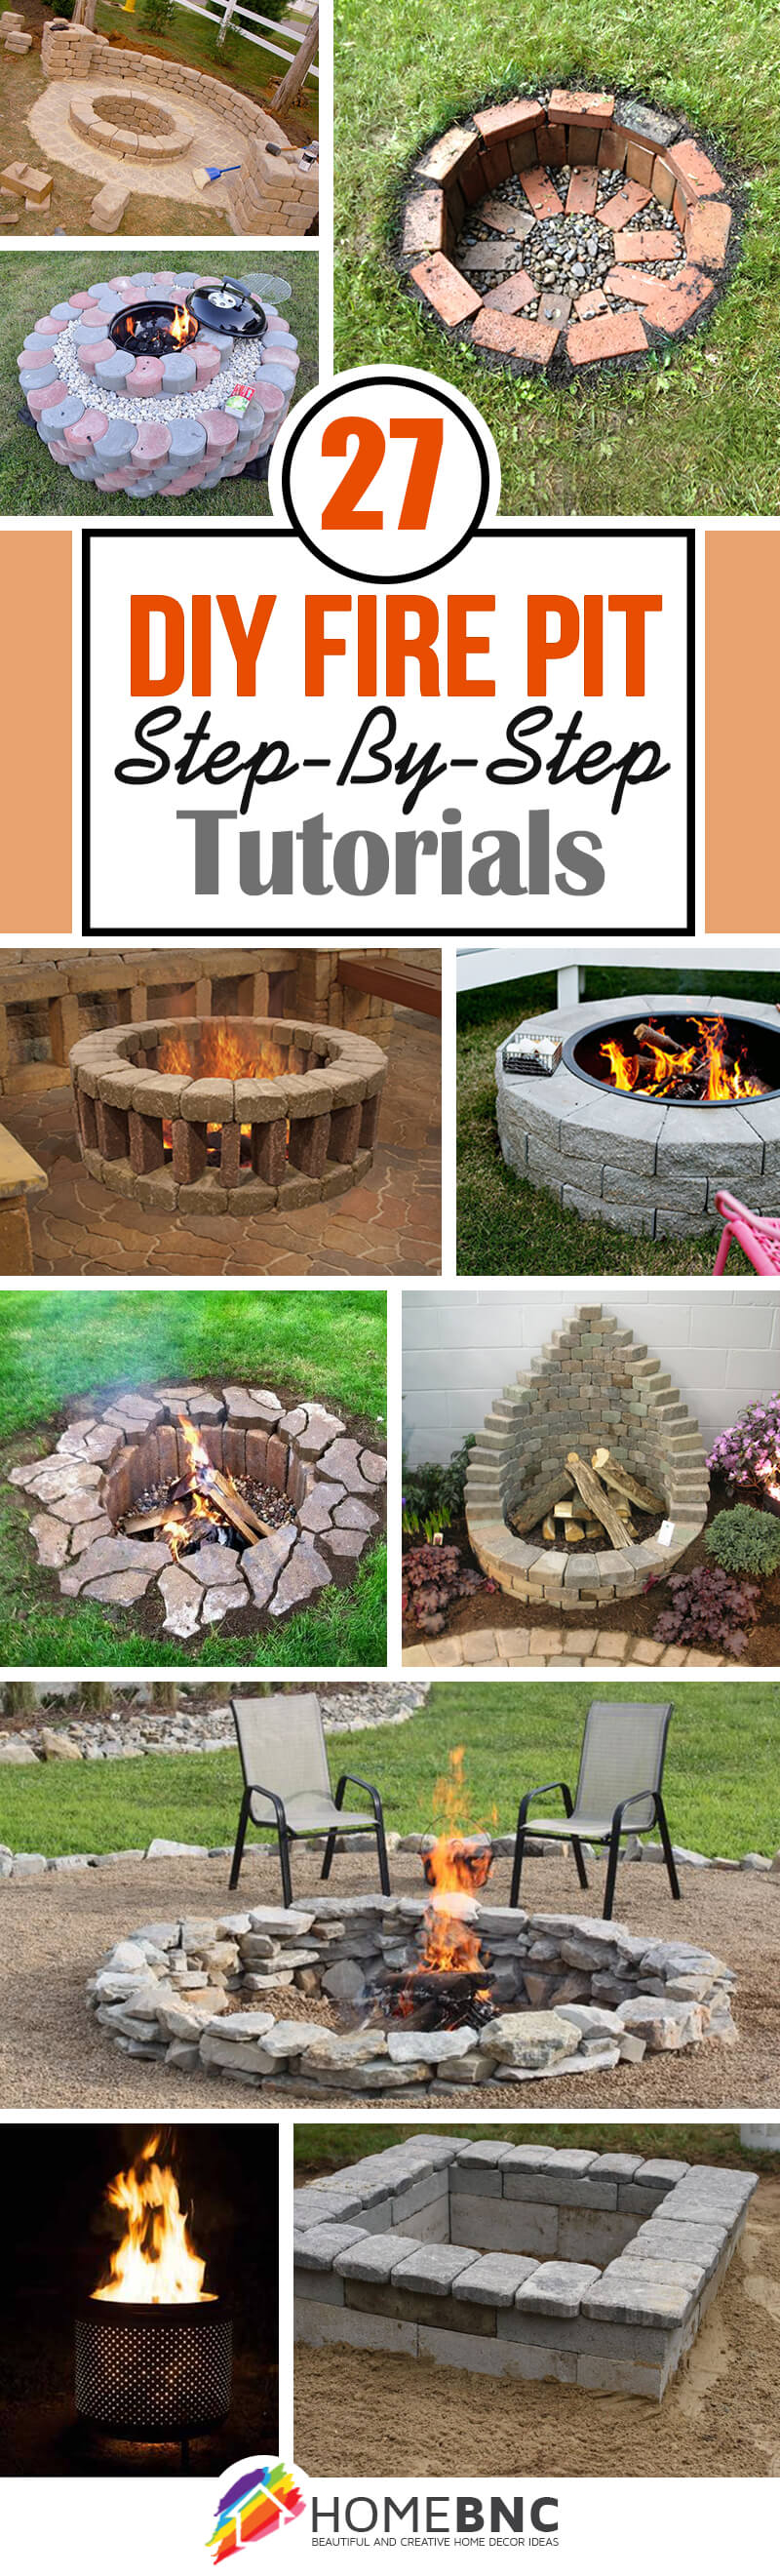 27 Best Diy Firepit Ideas And Designs, Diy Inexpensive Fire Pit